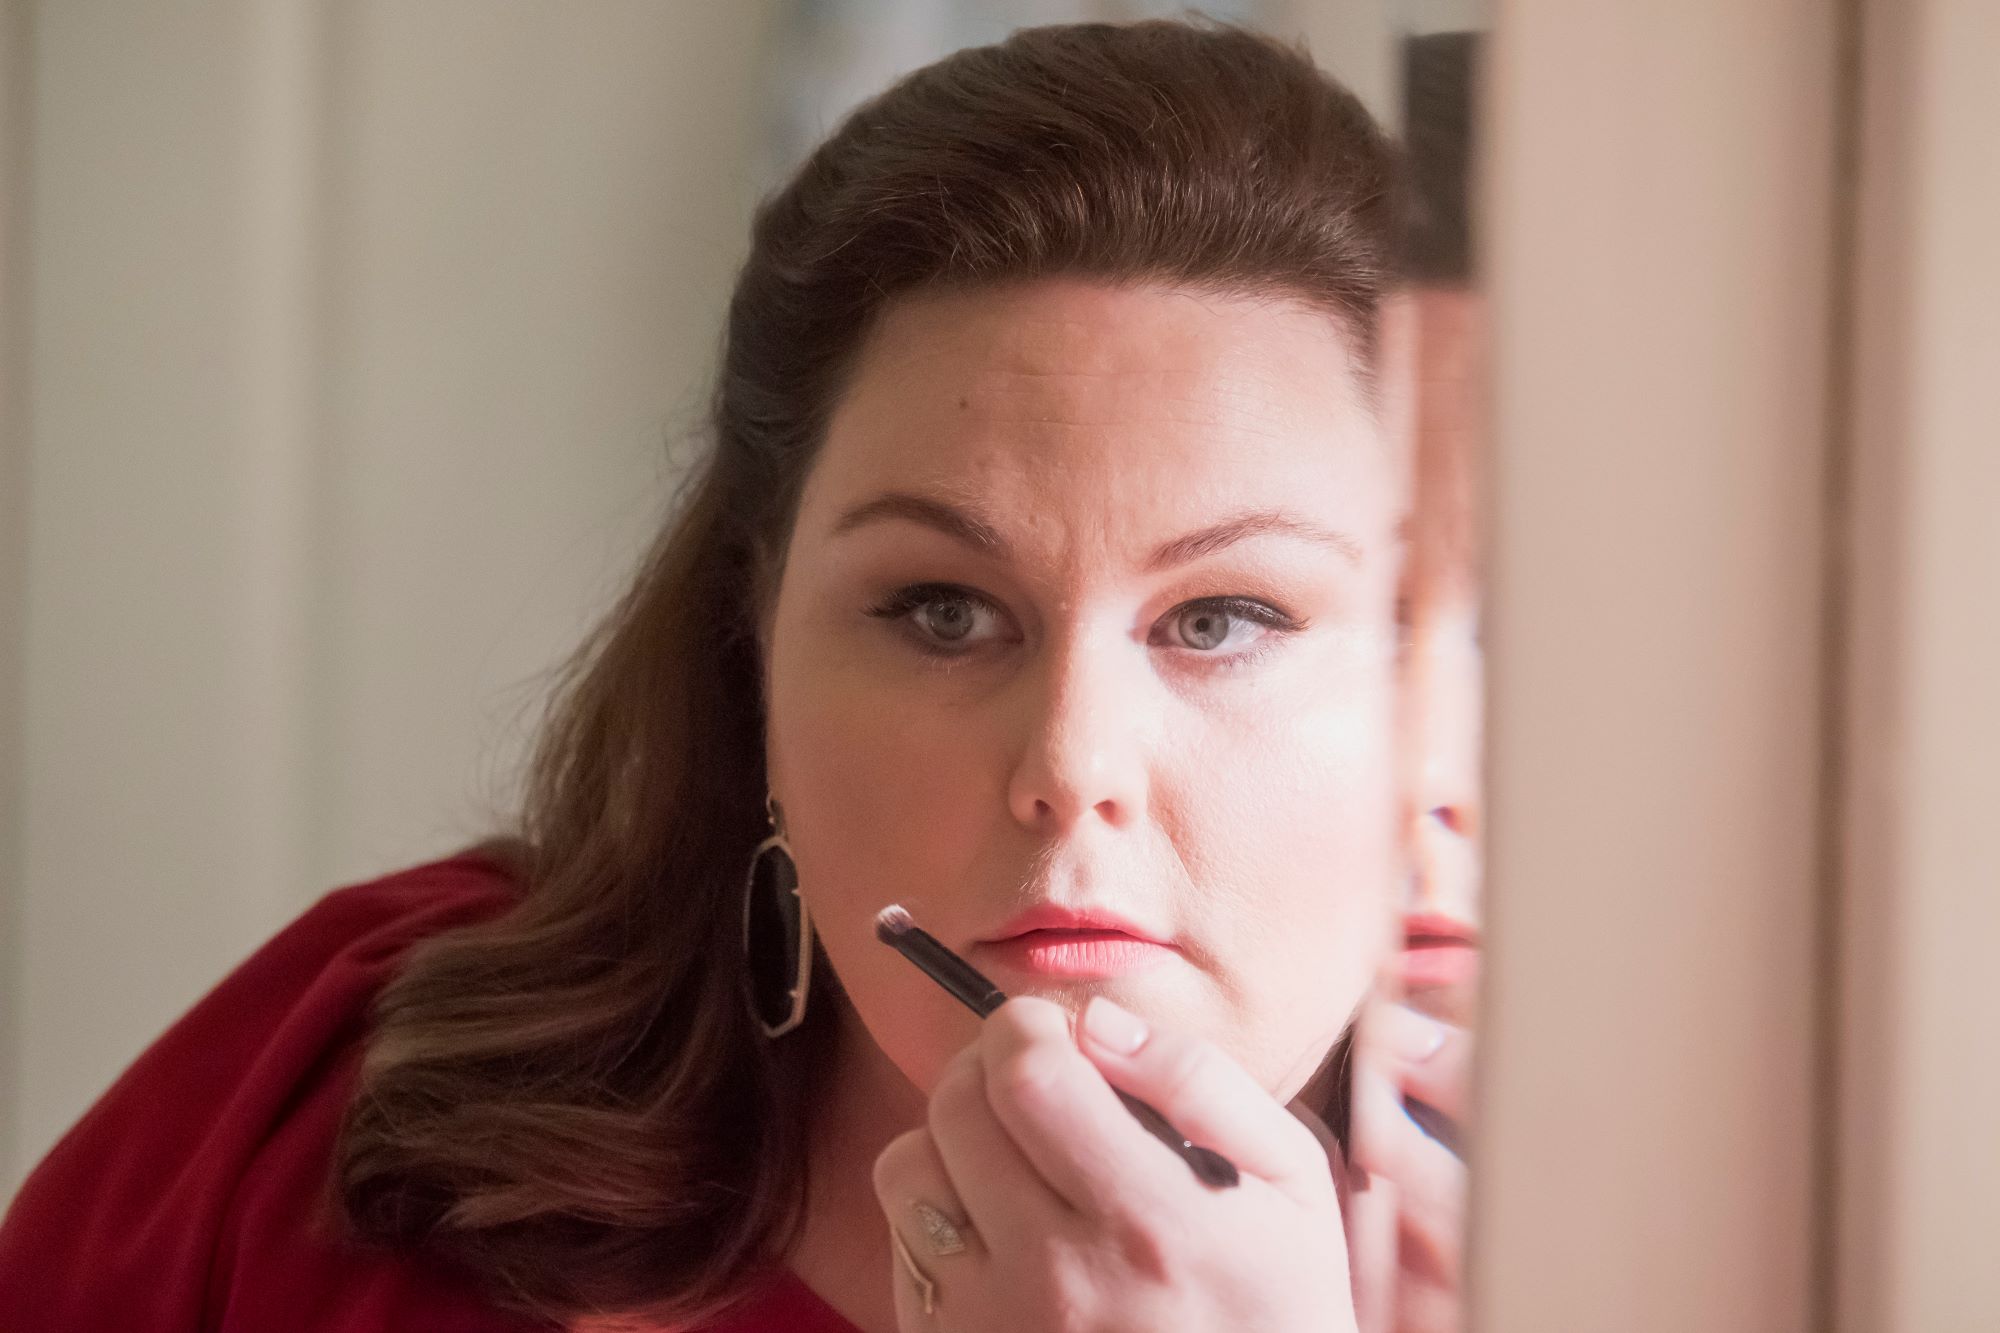 'This Is Us' Season 6 star Chrissy Metz, in character as Kate Pearson, wears a red shirt and applies makeup to her face with a small brush as she looks in the mirror.